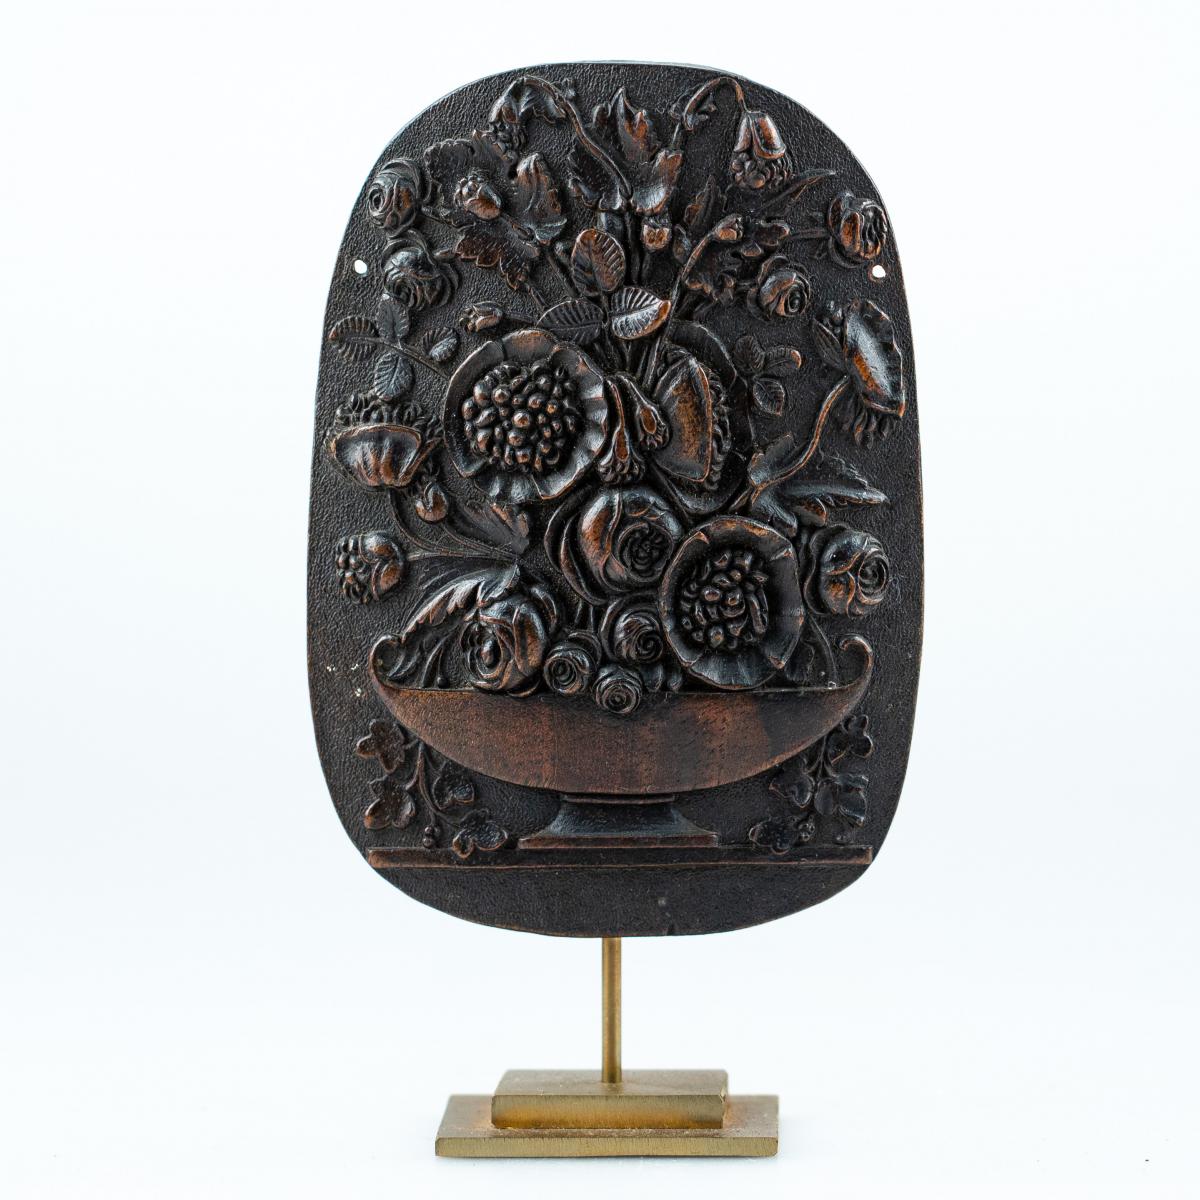 Small Carved Wood - Floral Decor - Early 19th Century